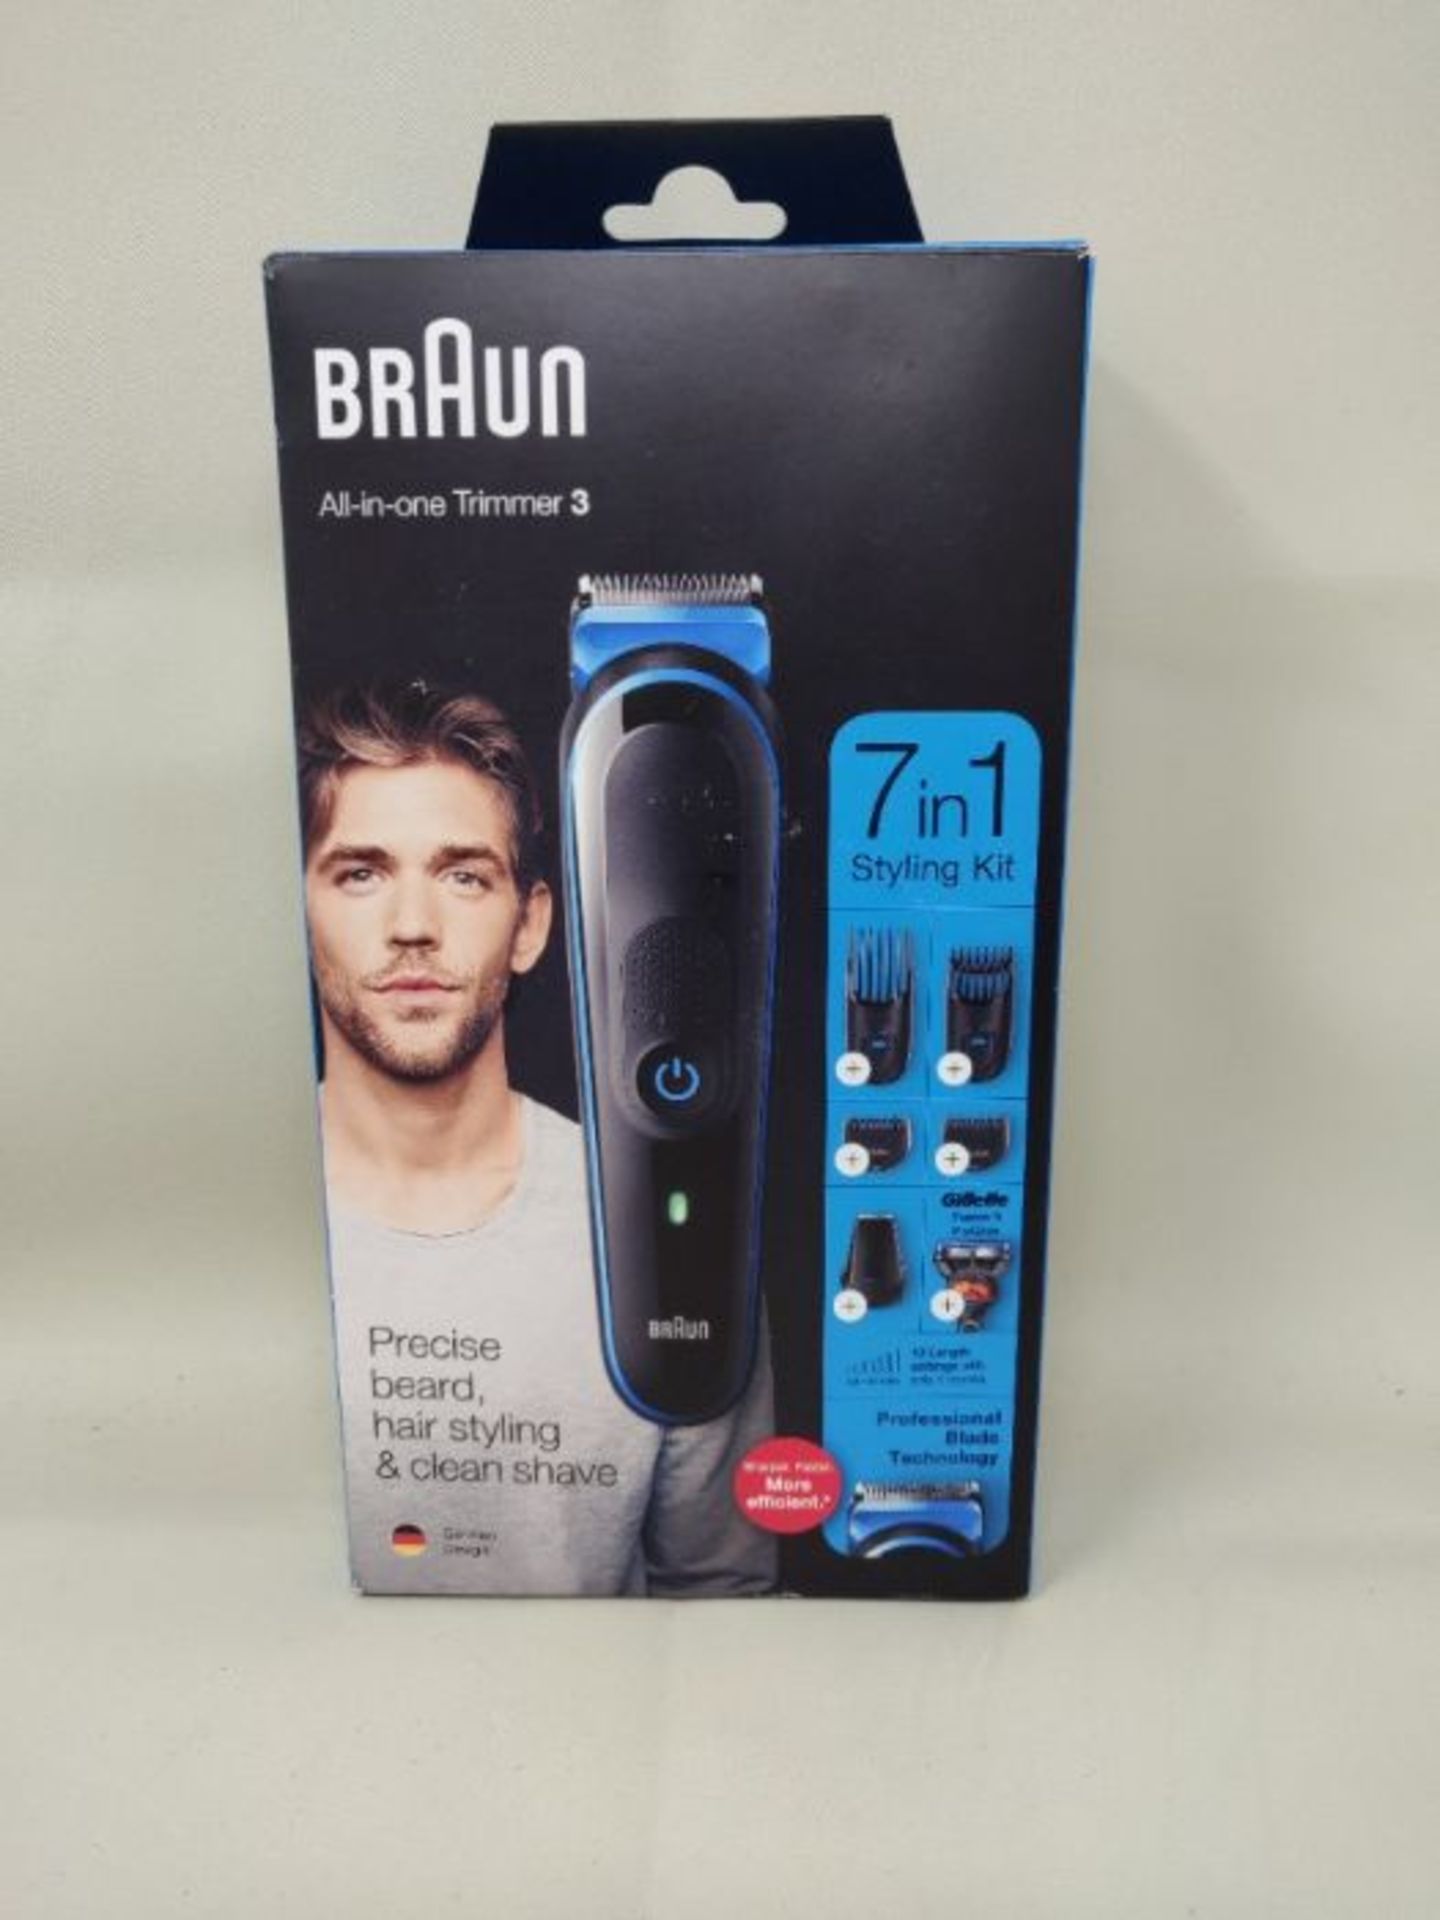 Braun 7-in-1 All-in-one Trimmer 3 MGK3245, Beard Trimmer for Men, Hair Clipper and Fac - Image 2 of 3